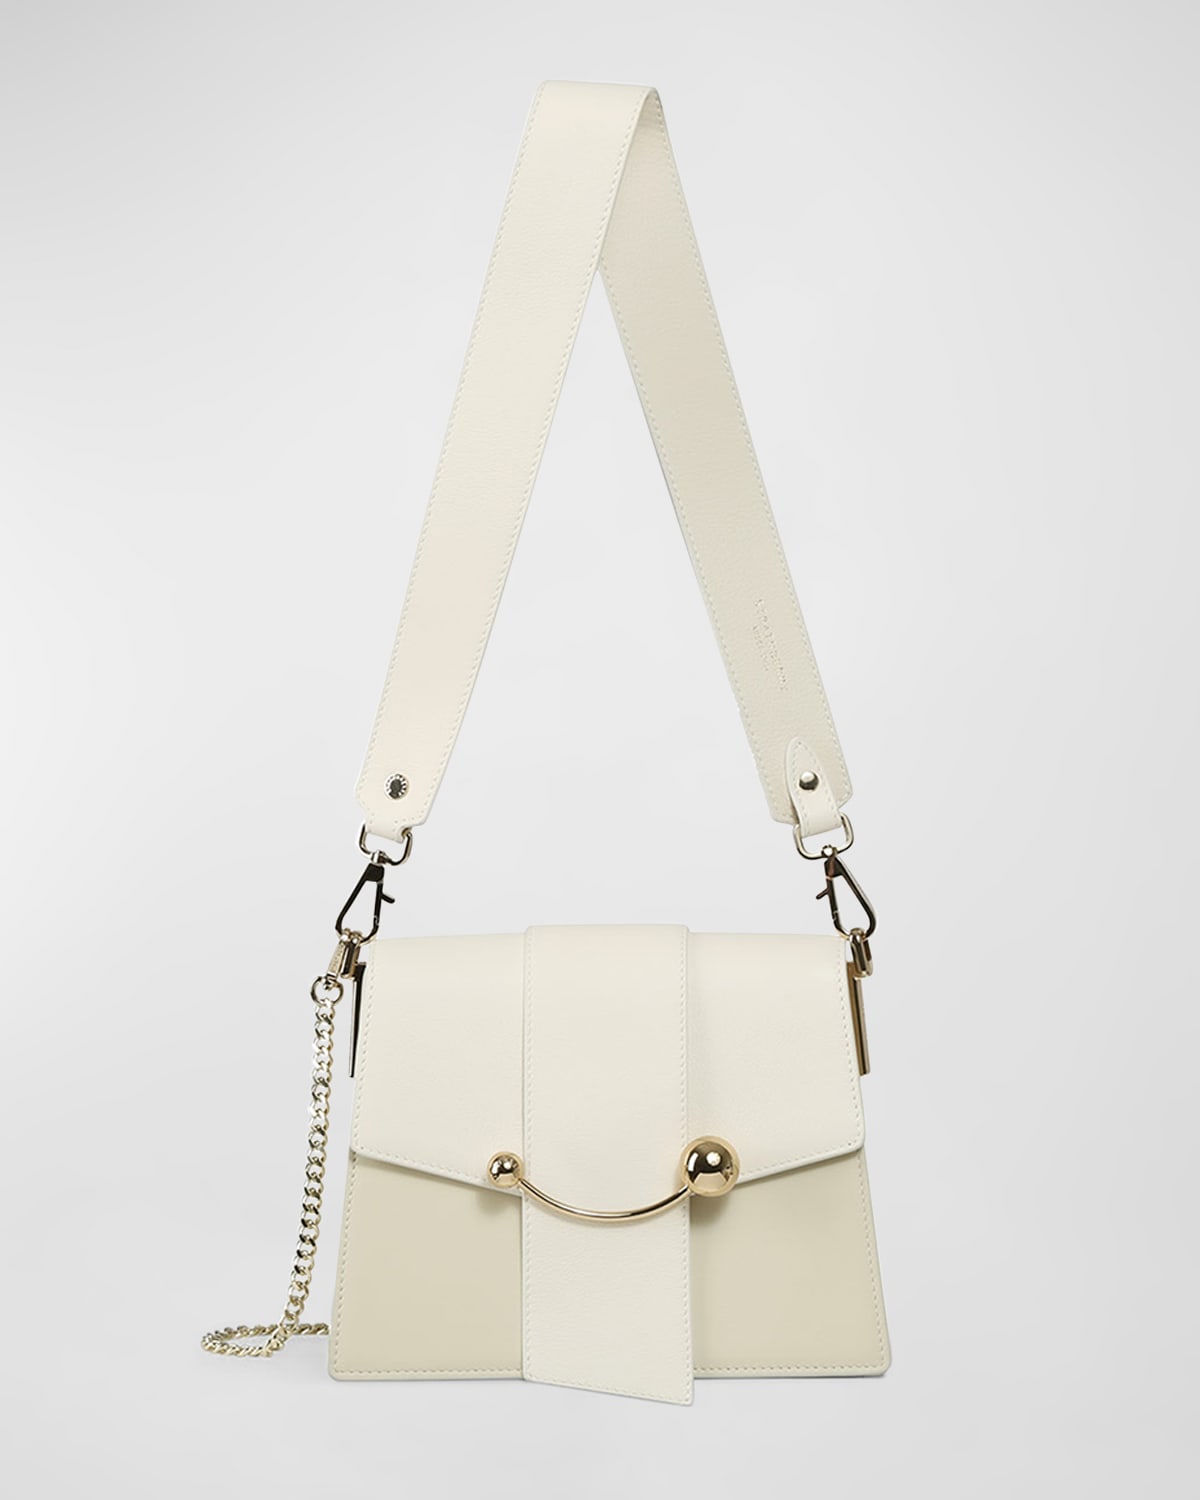 Strathberry Crescent Flap Leather Chain Shoulder Bag